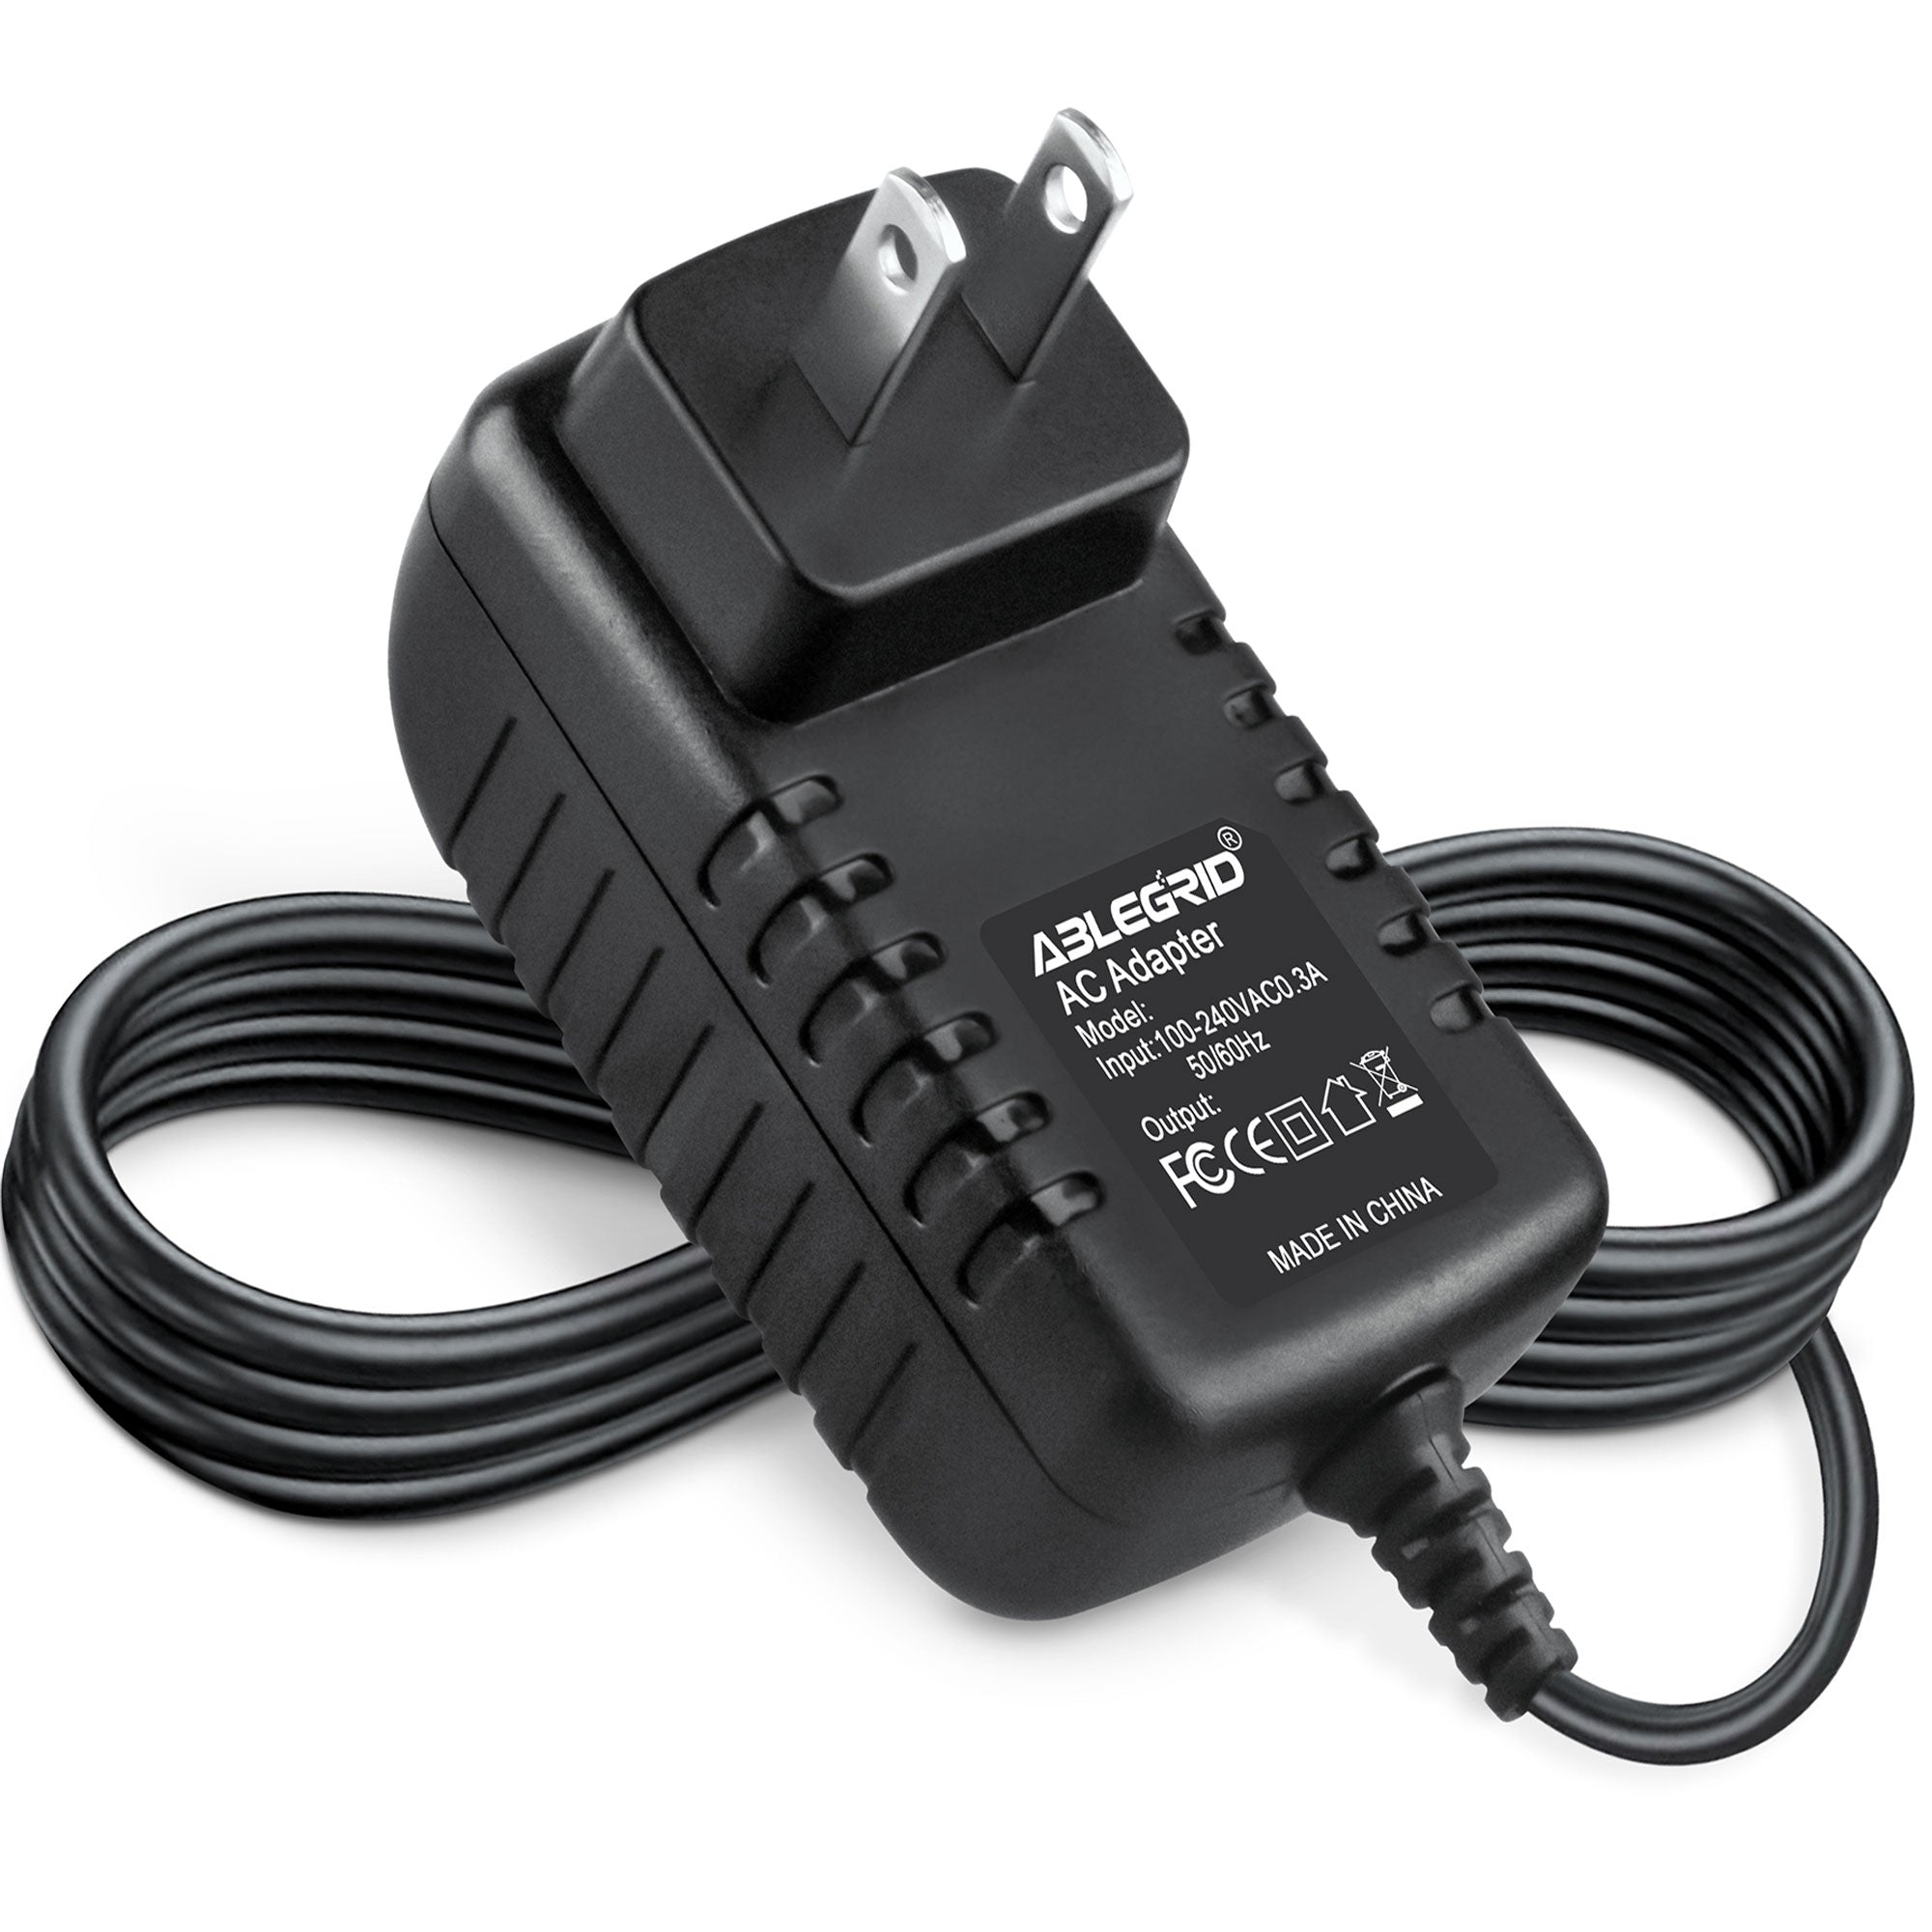 AbleGrid 12V AC / DC Adapter for First Alert Camera Model: 600C 600 TVL 600TVL CMOS Color Camera Wire Through Mount 12VDC Power Supply Cord Cable PS Wall Home Charger Input: 100 - 240 VAC Worldwide Use Mains PSU